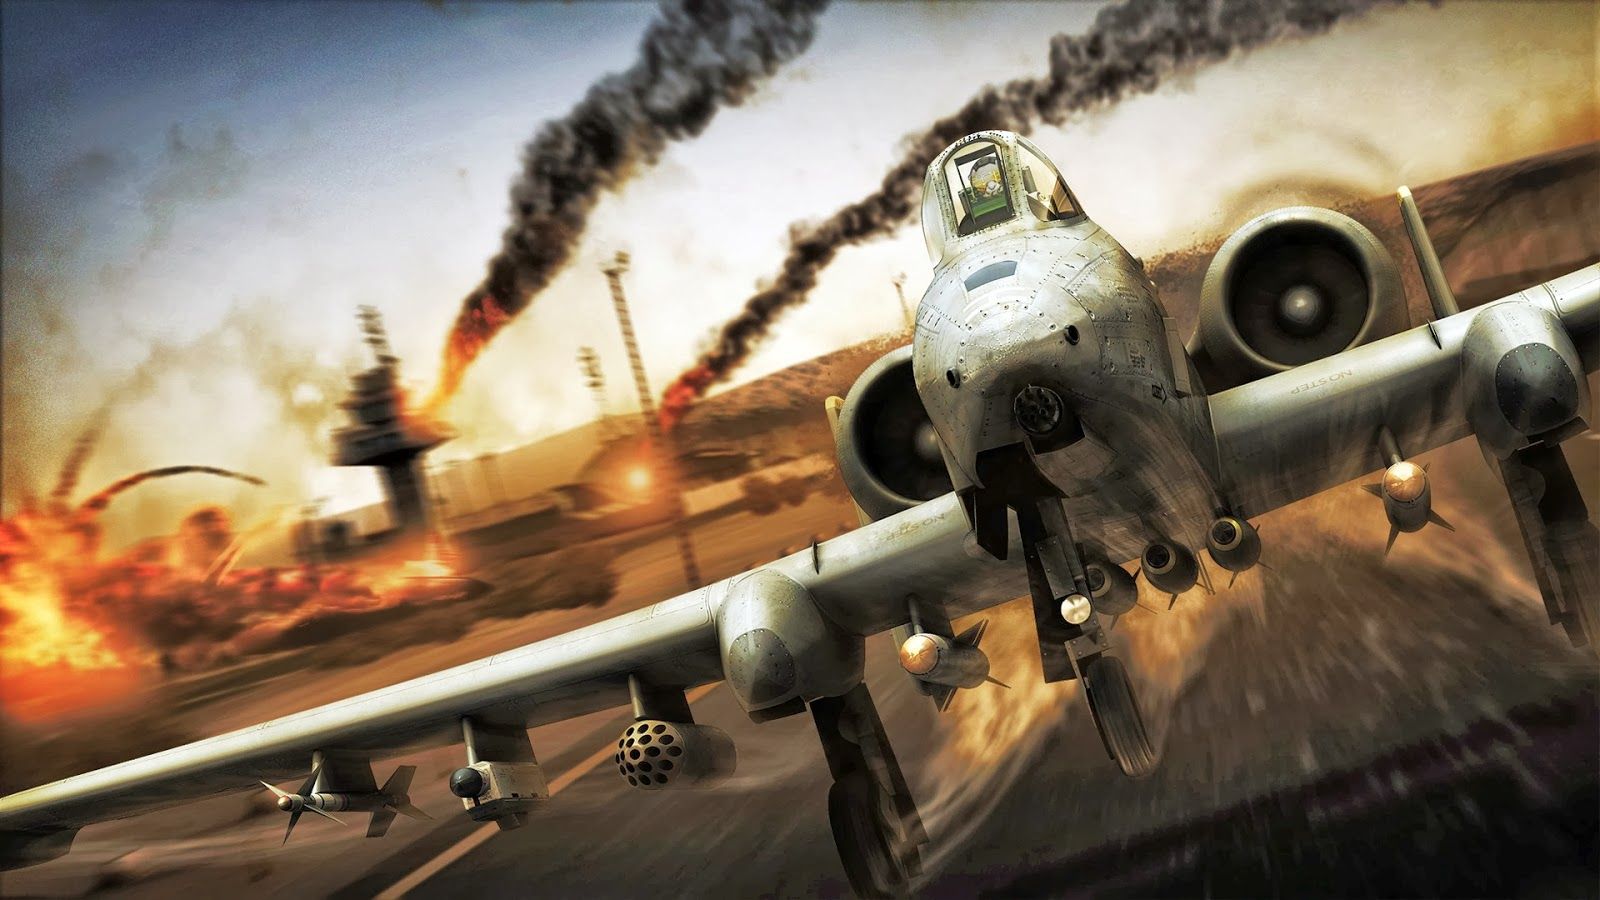 Fighter Plane HD Image